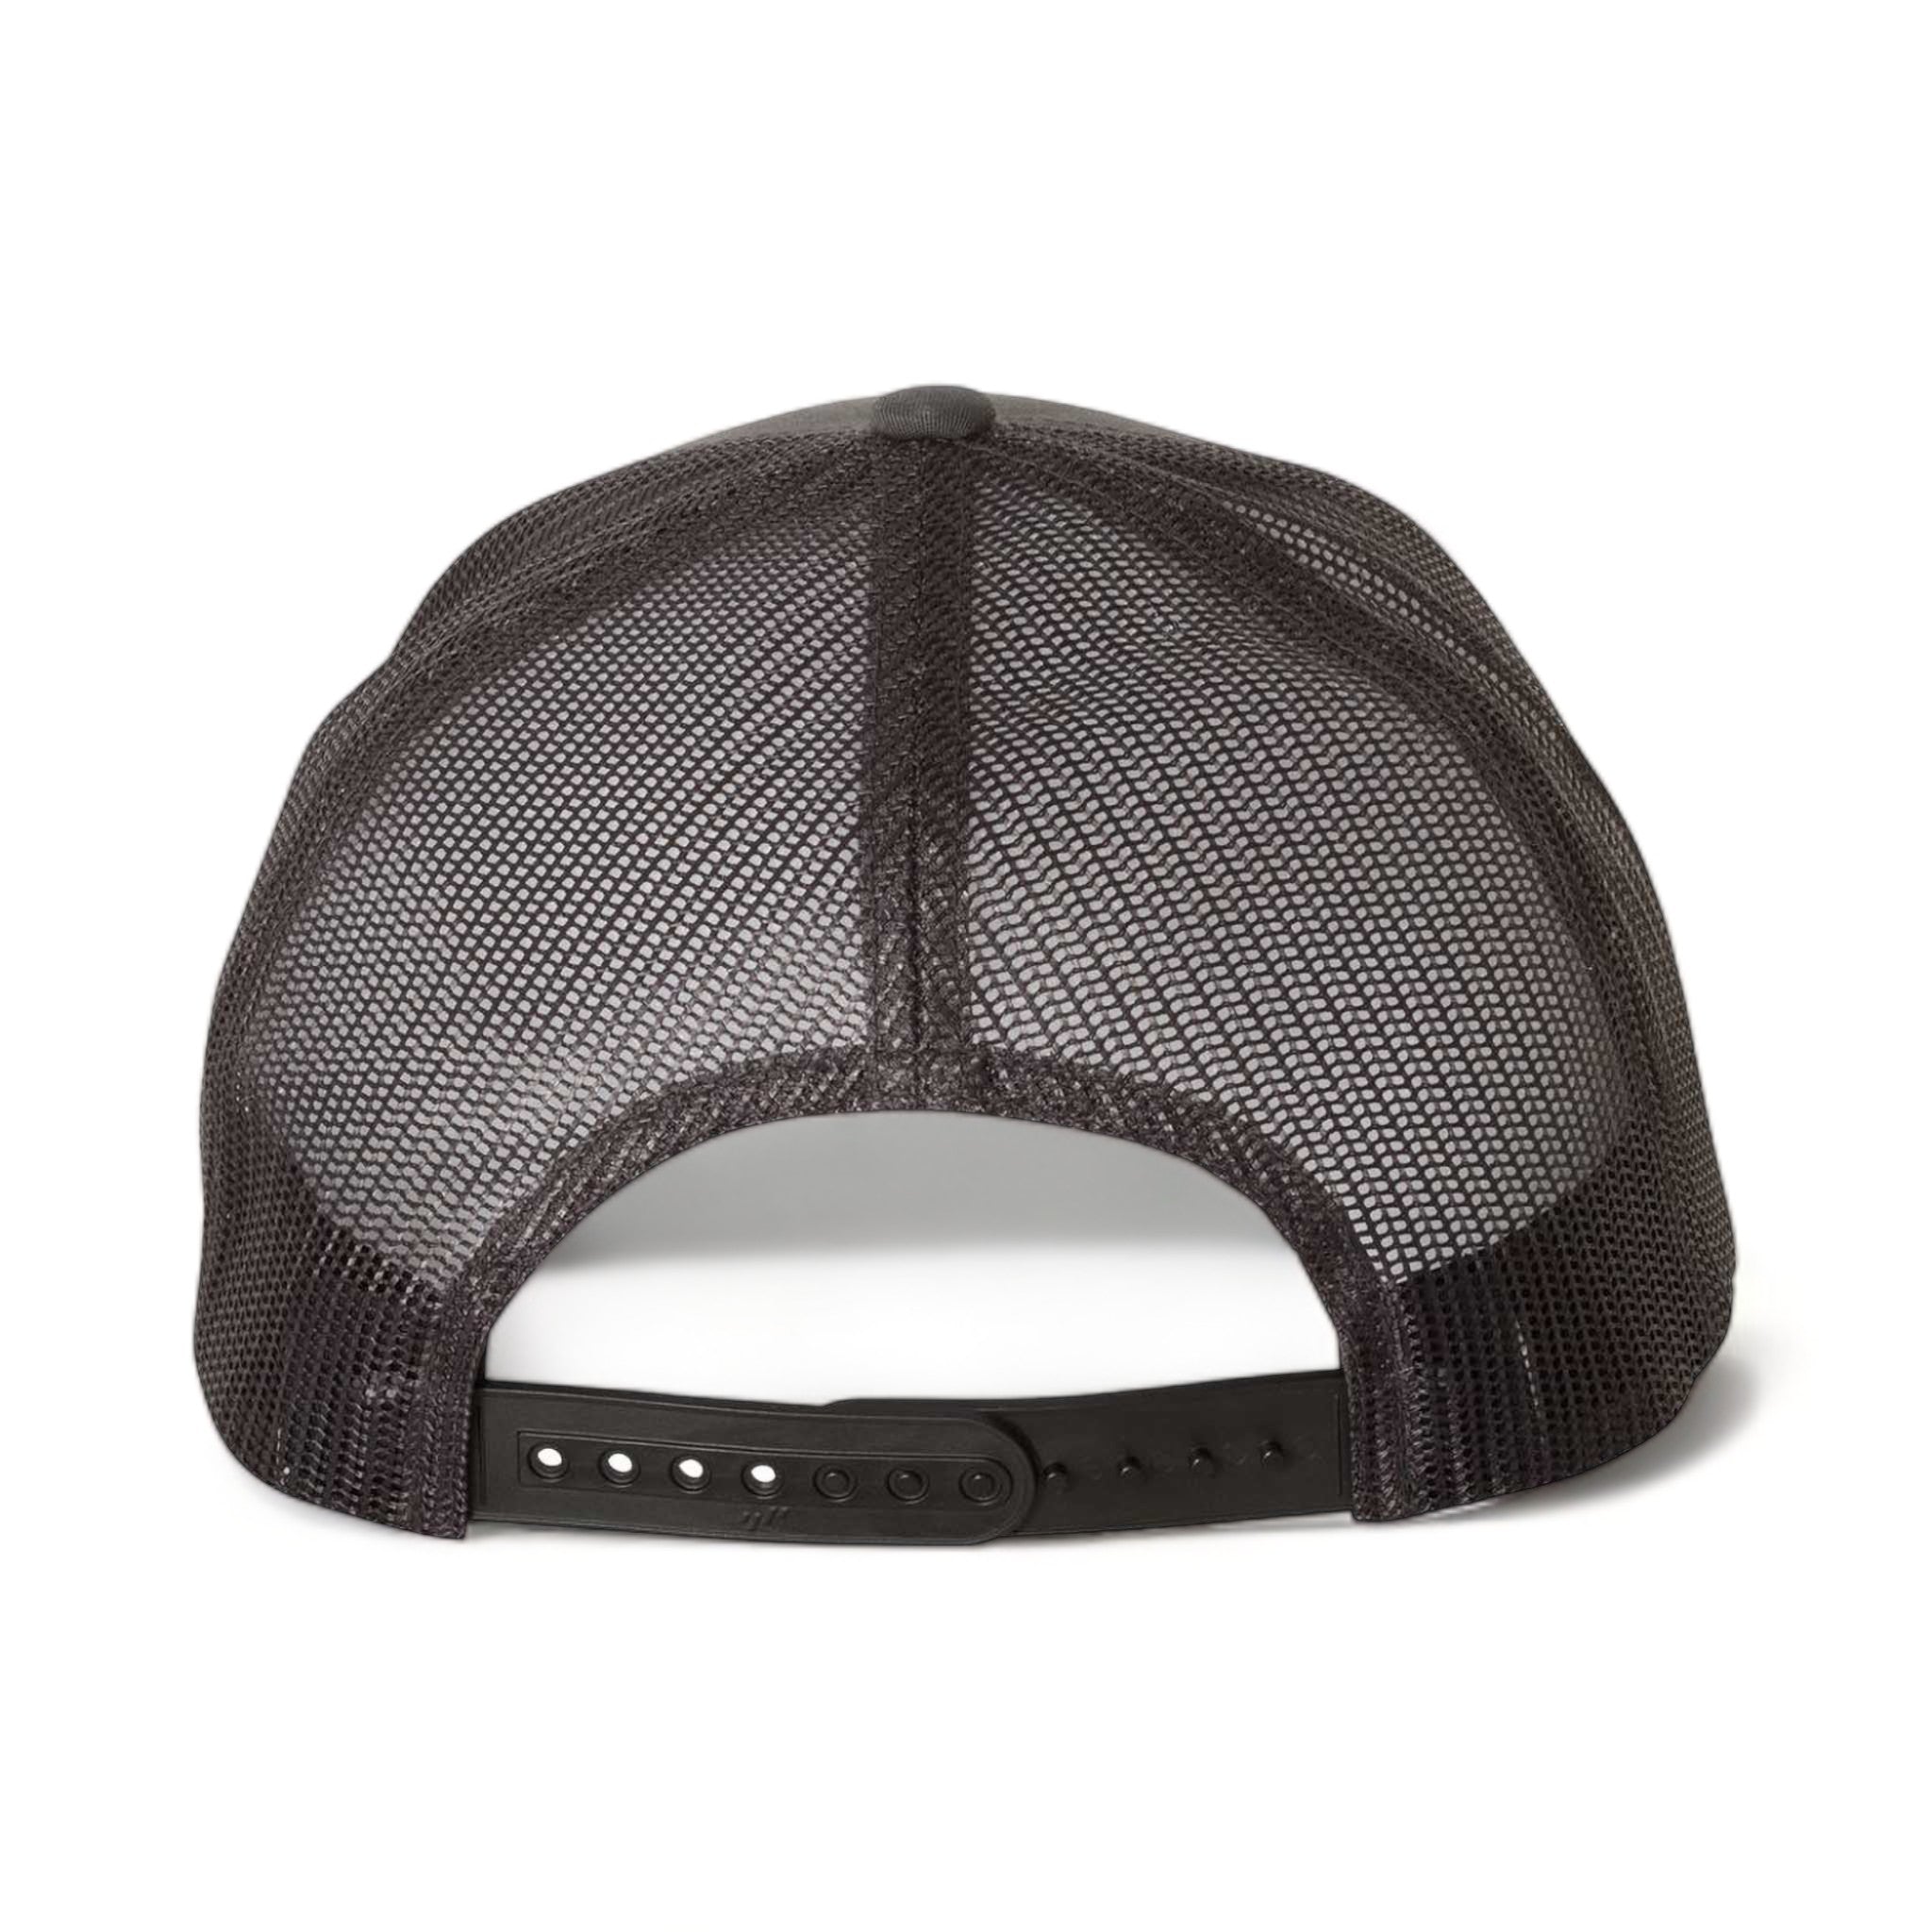 Back view of YP Classics 6606 custom hat in charcoal